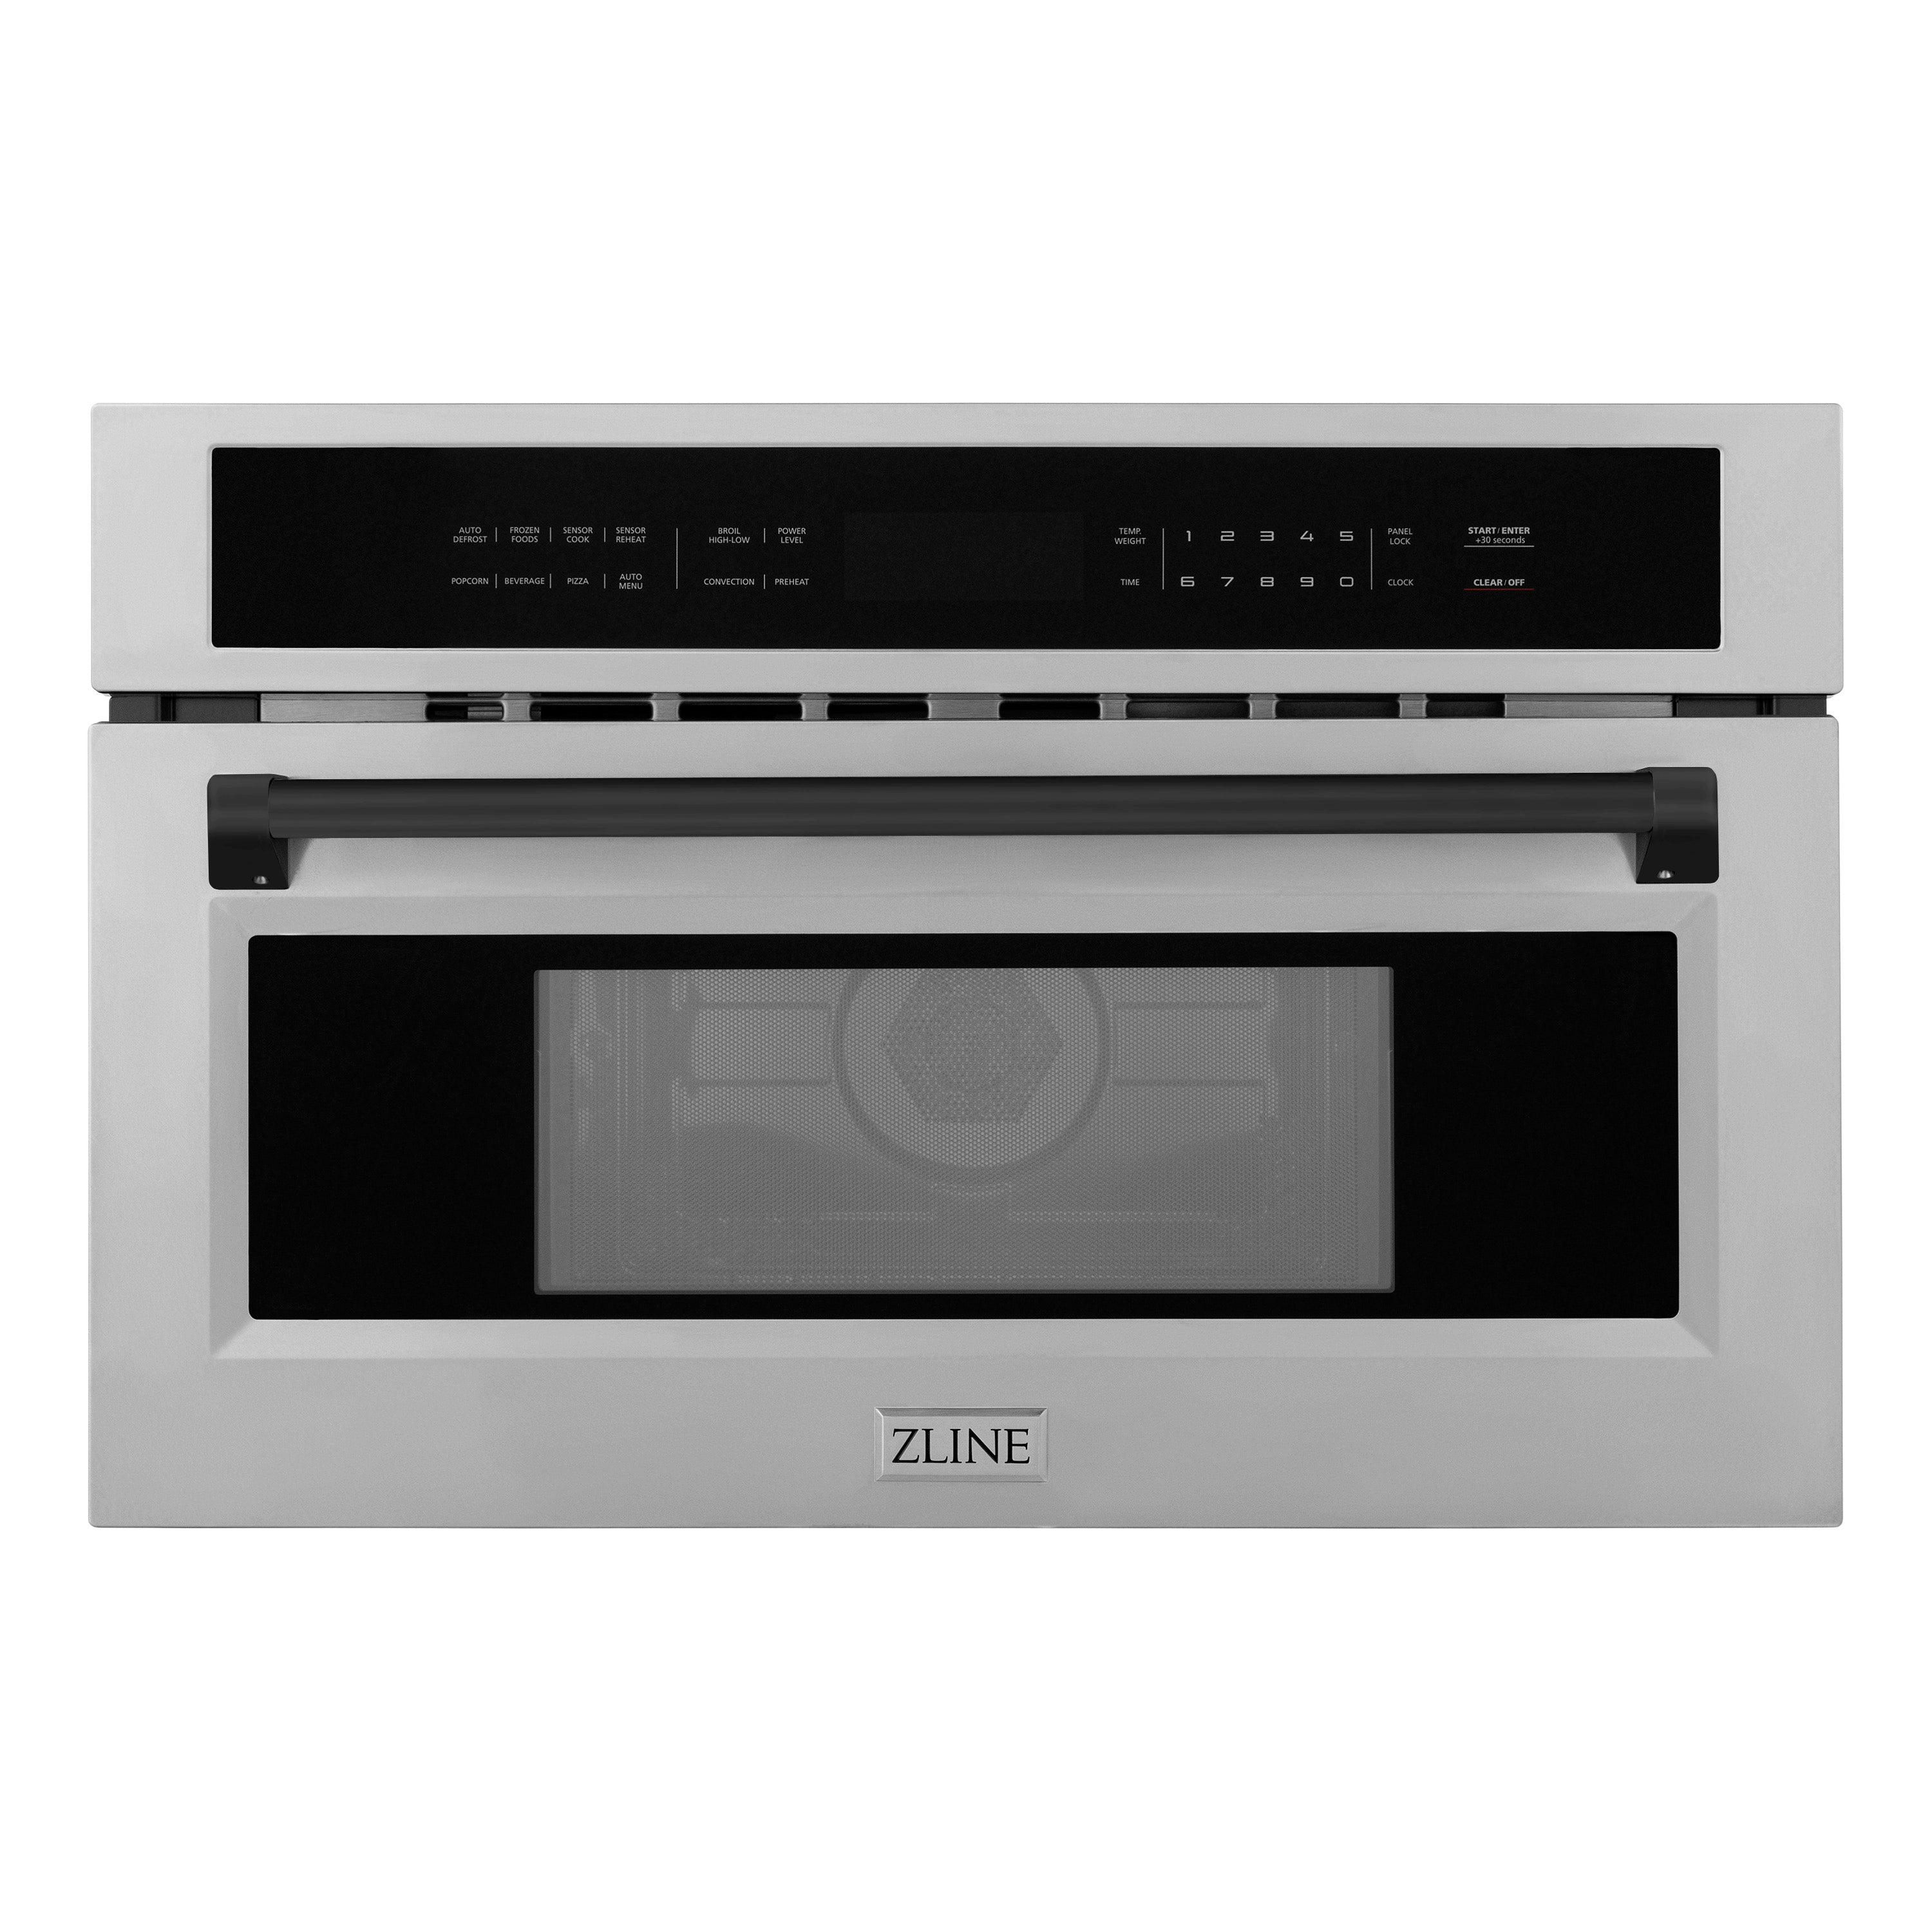 ZLINE Autograph Edition 30” 1.6 cu ft. Built-in Convection Microwave Oven in Stainless Steel and Matte Black Accents